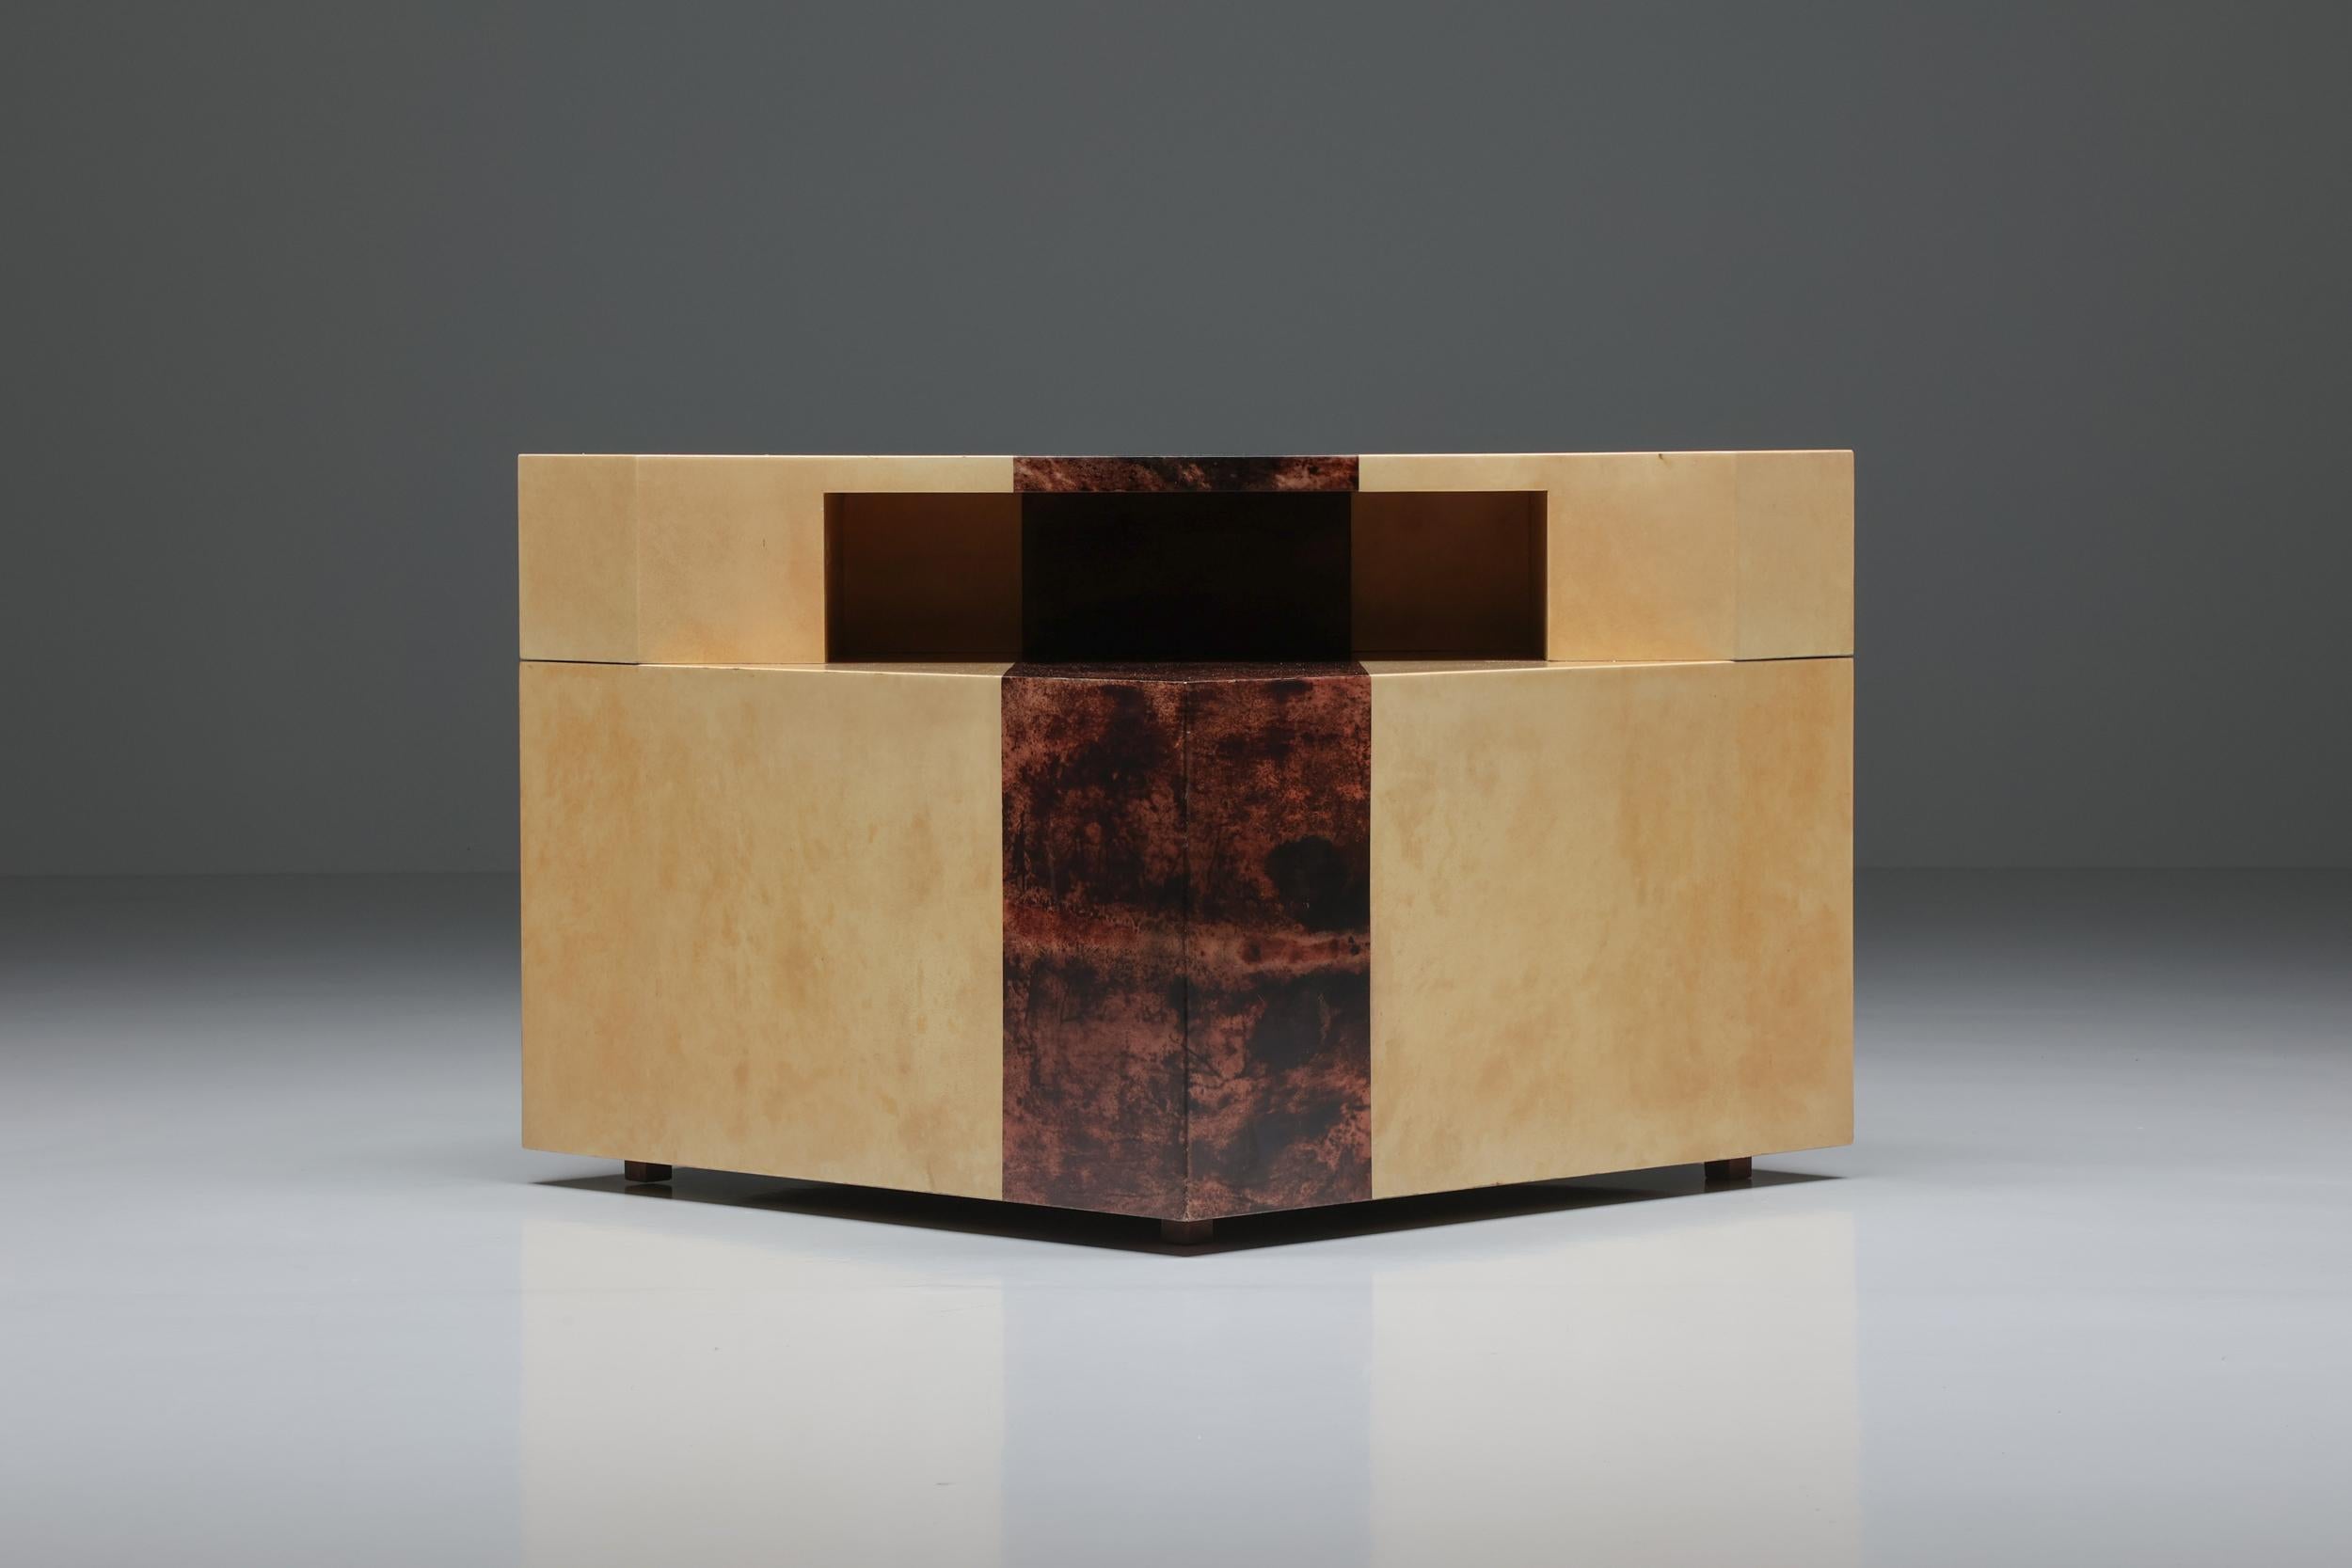 Post-modern two-one console corner side table by Aldo Tura, a true gem of 1970s Italian craftsmanship. This Hollywood Regency masterpiece showcases the exquisite artistry of lacquered parchment, marrying two contrasting tones in a visually striking